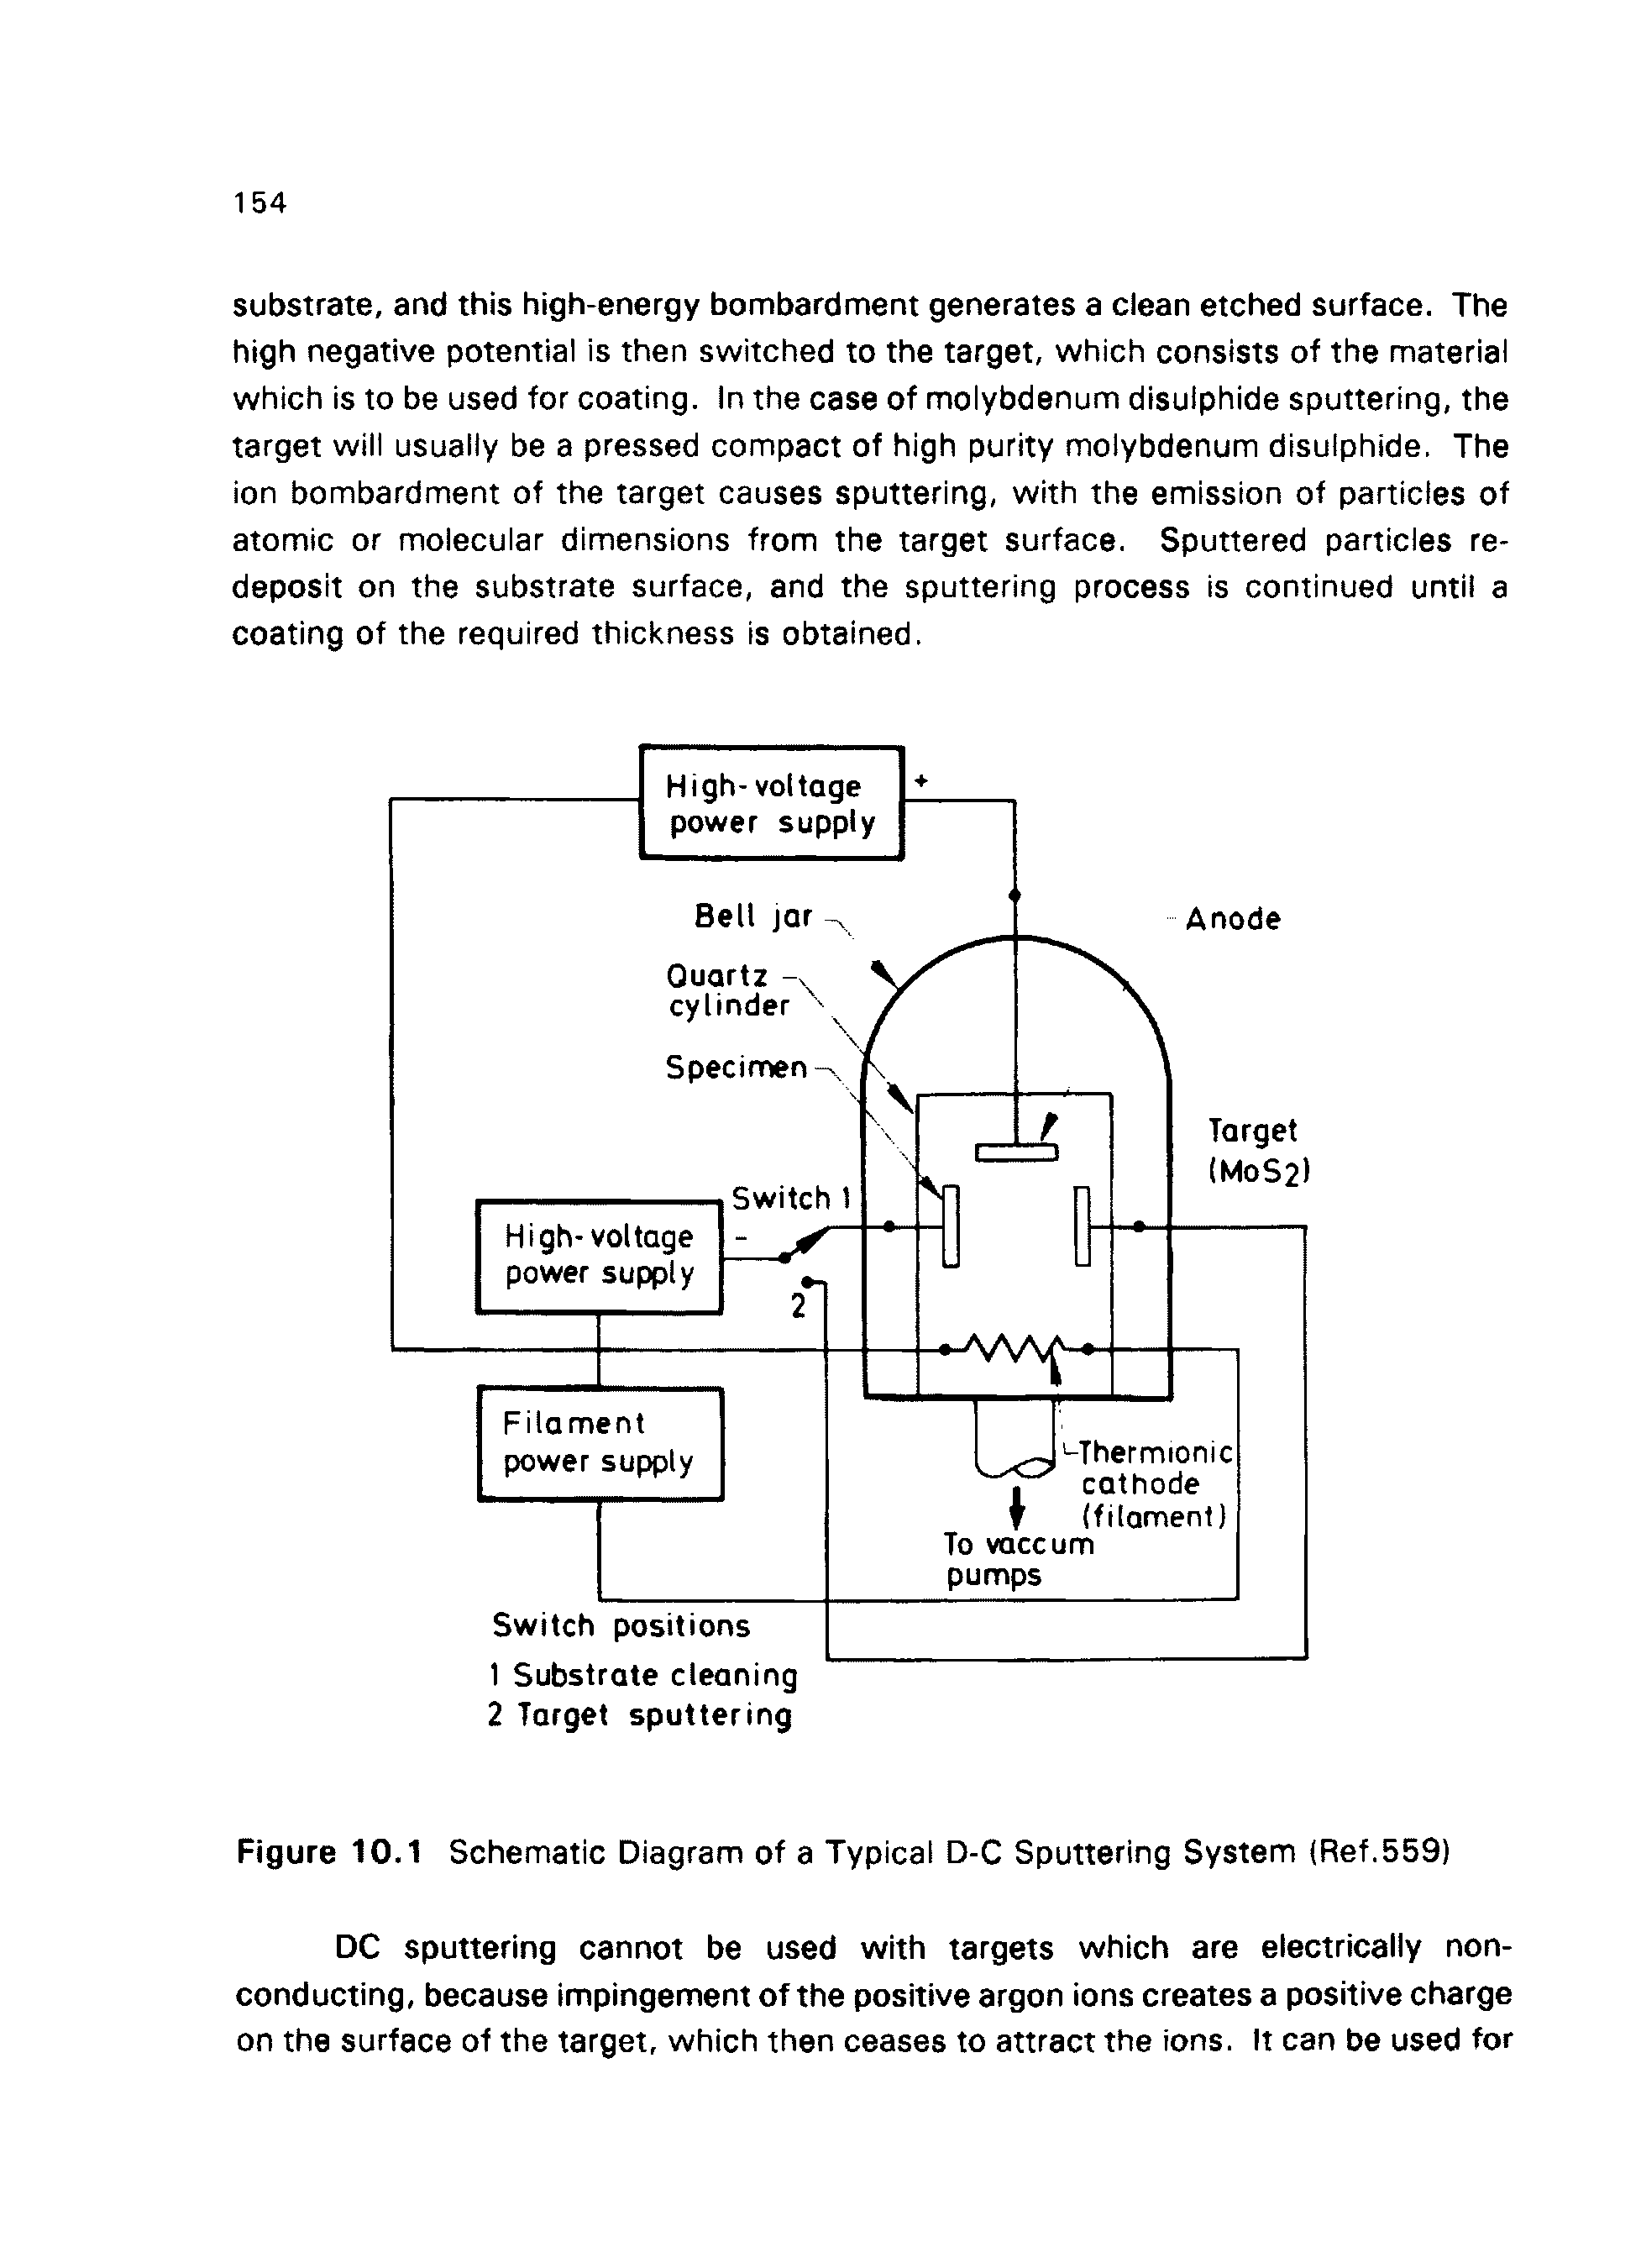 Figure 10.1 Schematic Diagram of a Typical D-C Sputtering System (Ref.559)...